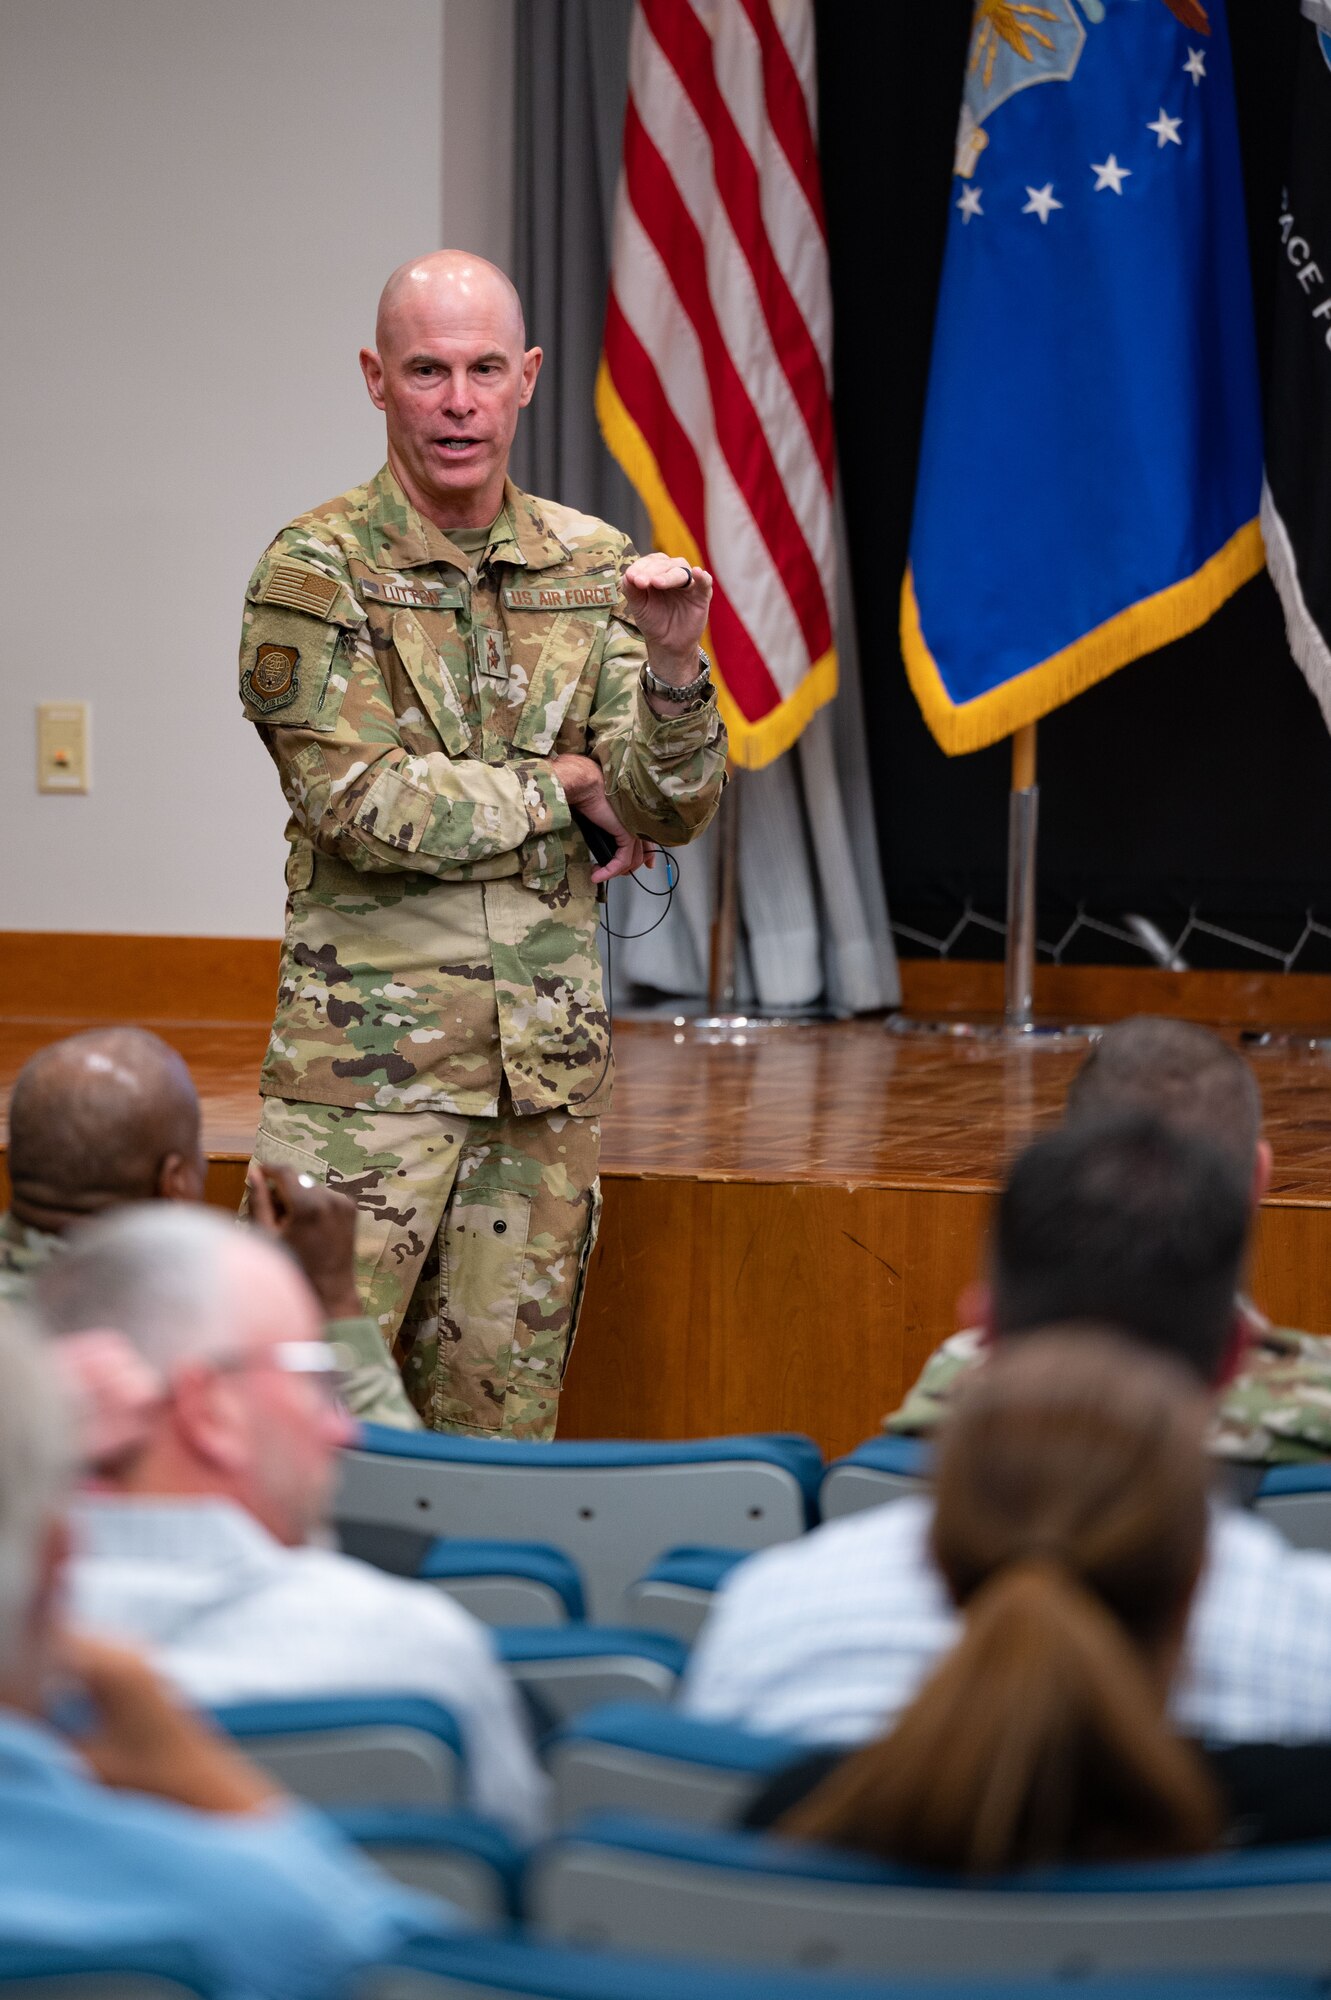 U.S. Air Force Maj. Gen. Micheal Lutton engages with members of the Space Force community at a townhall meeting at Peterson Space Force Base, Colorado, August 24, 2023.  Lutton, who leads the 20th Air Force, Air Force Global Strike Command,  answered questions about the Missile Community Cancer Study.  Historically, the Missile and Space communities have been closely linked, and many Guardians previously served as Air Force missileers.  (U.S. Space Force photo by Dave Grim)